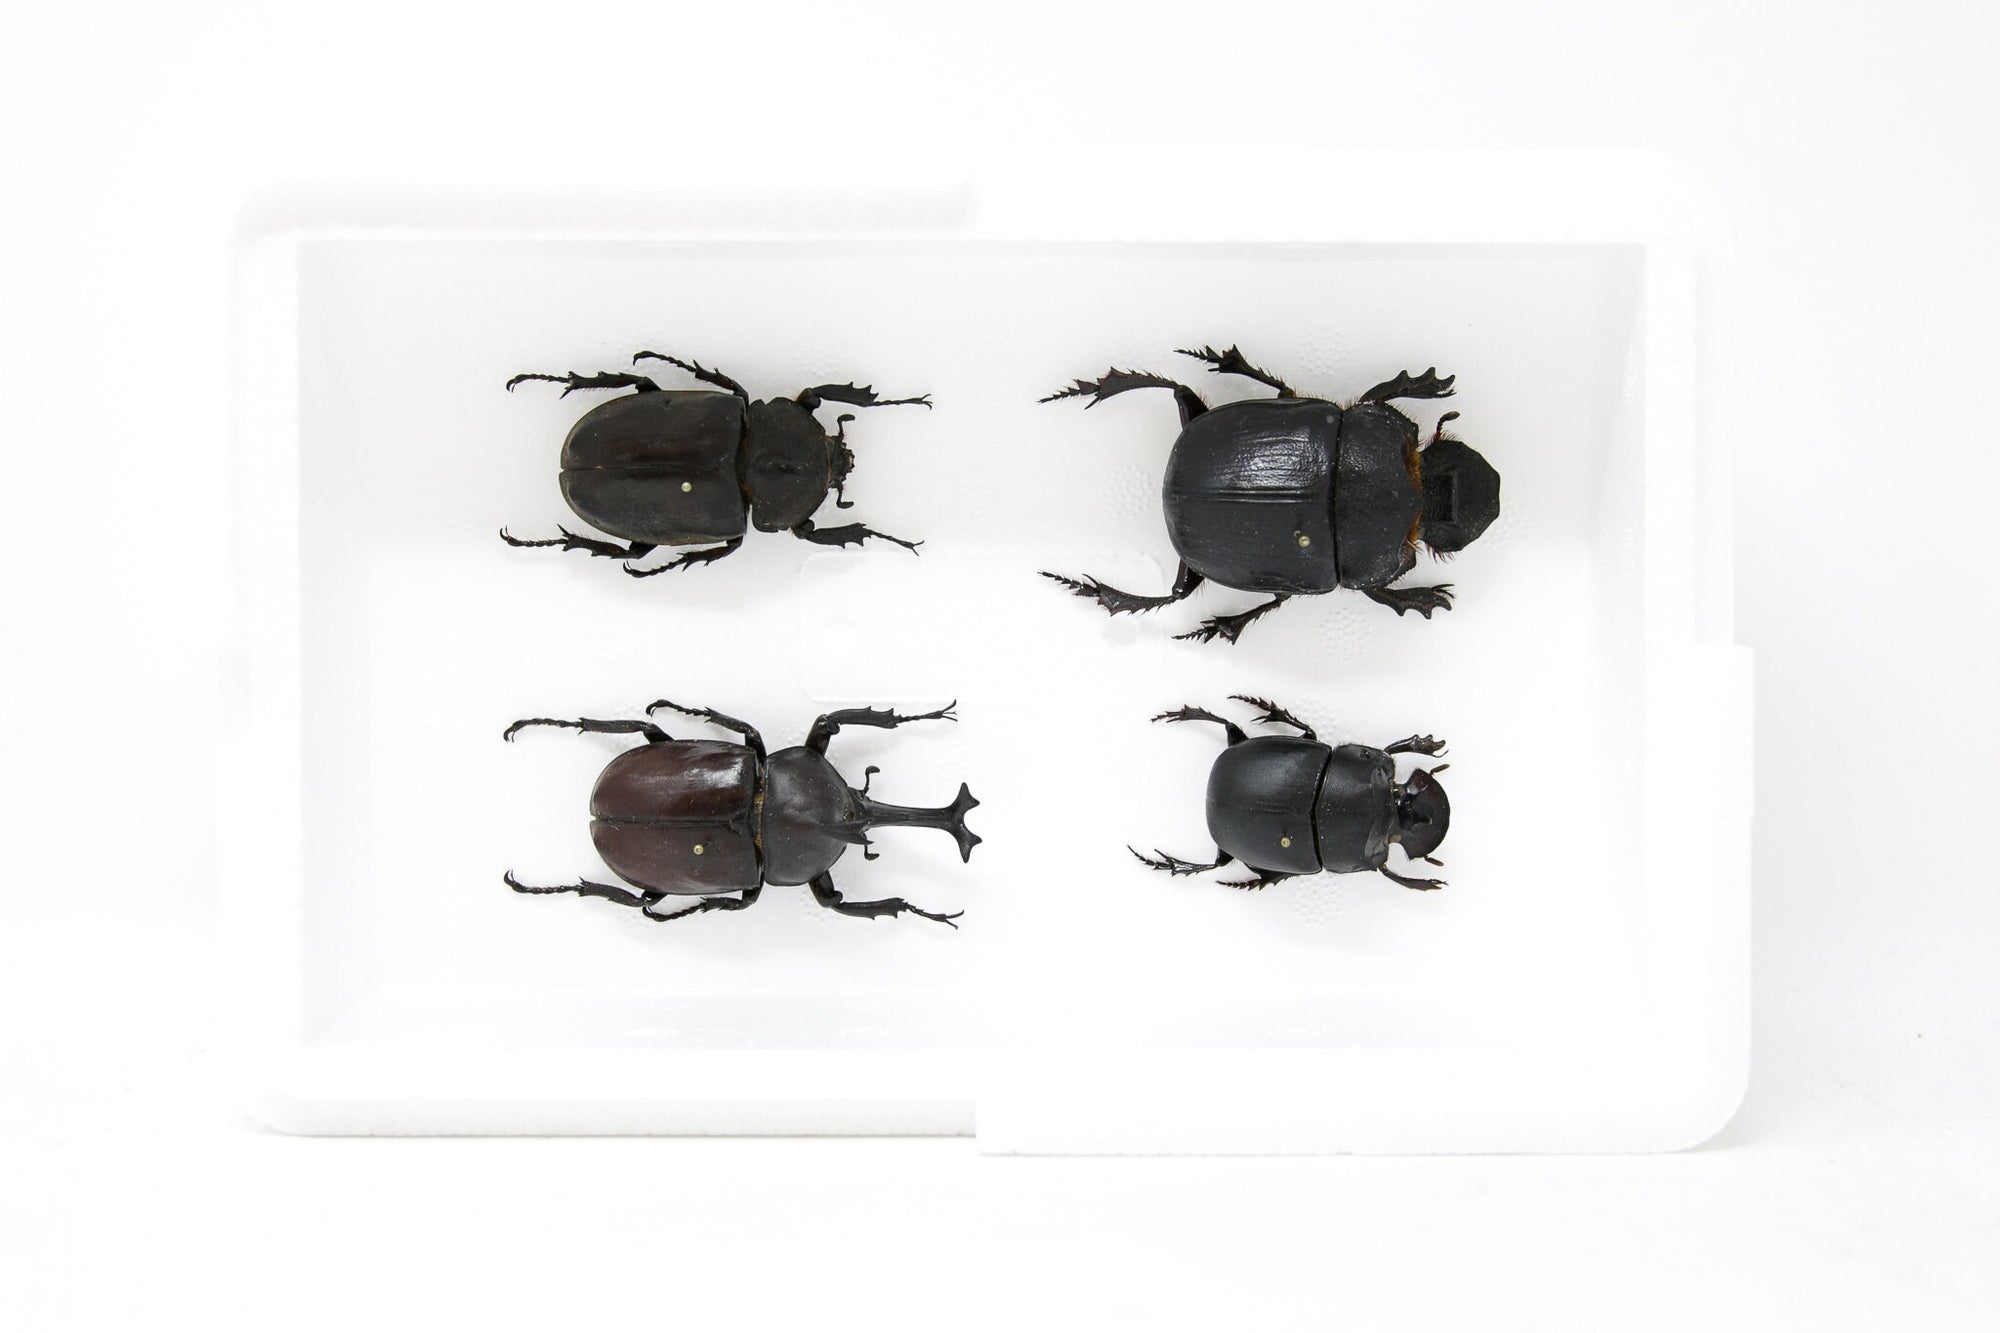 Giant Scarabs & Rhino Beetles Collection, Inc. Scientific Collection Data, A1 Quality, Entomology, Real Insect Specimens (#16)